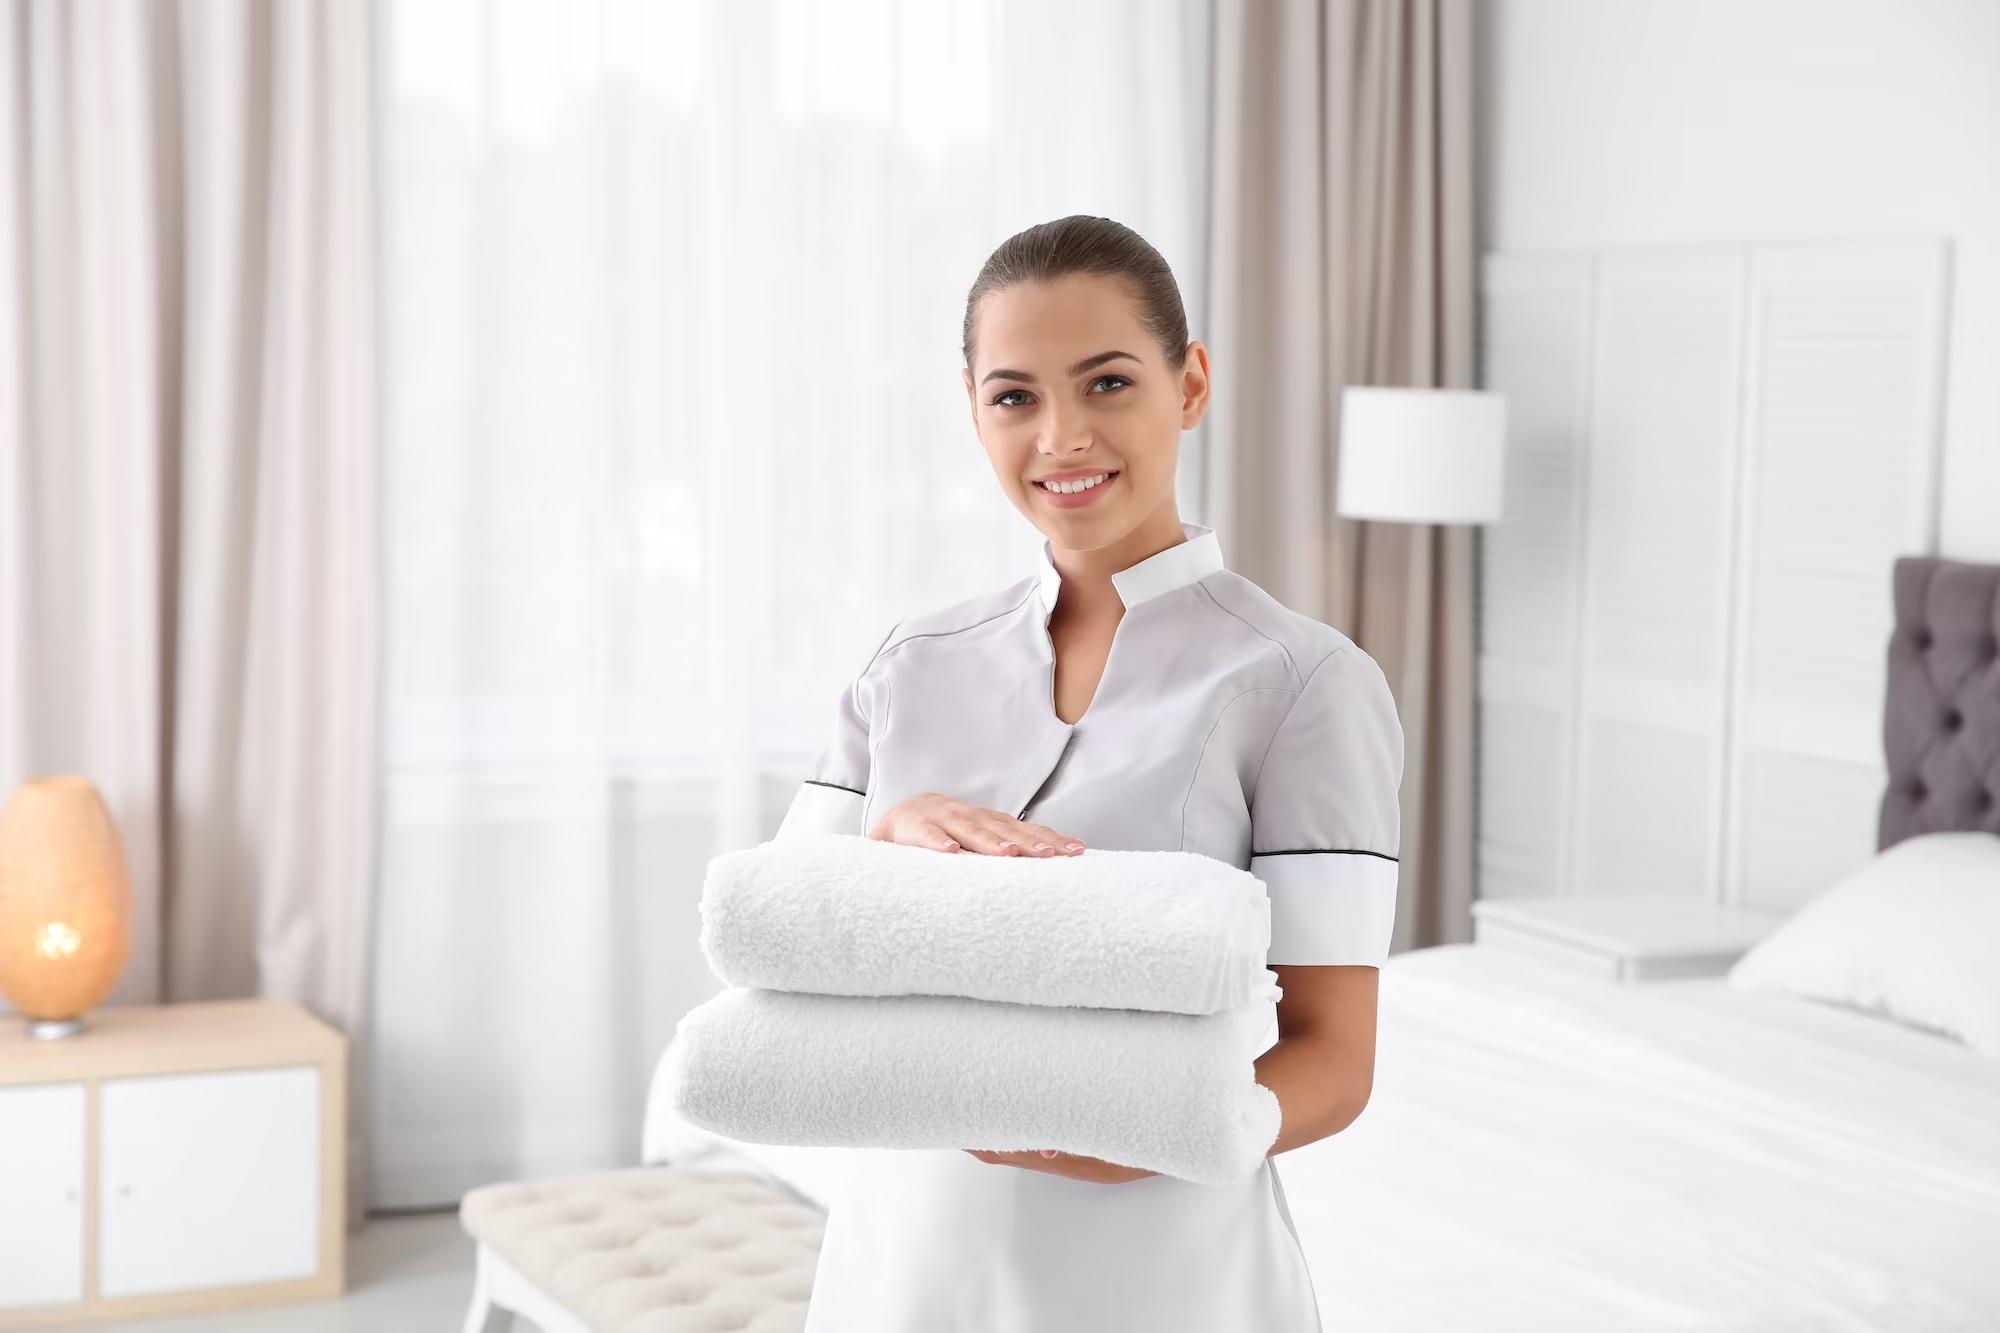 hotel housekeeping staff in hotel room holding neatly folded towels